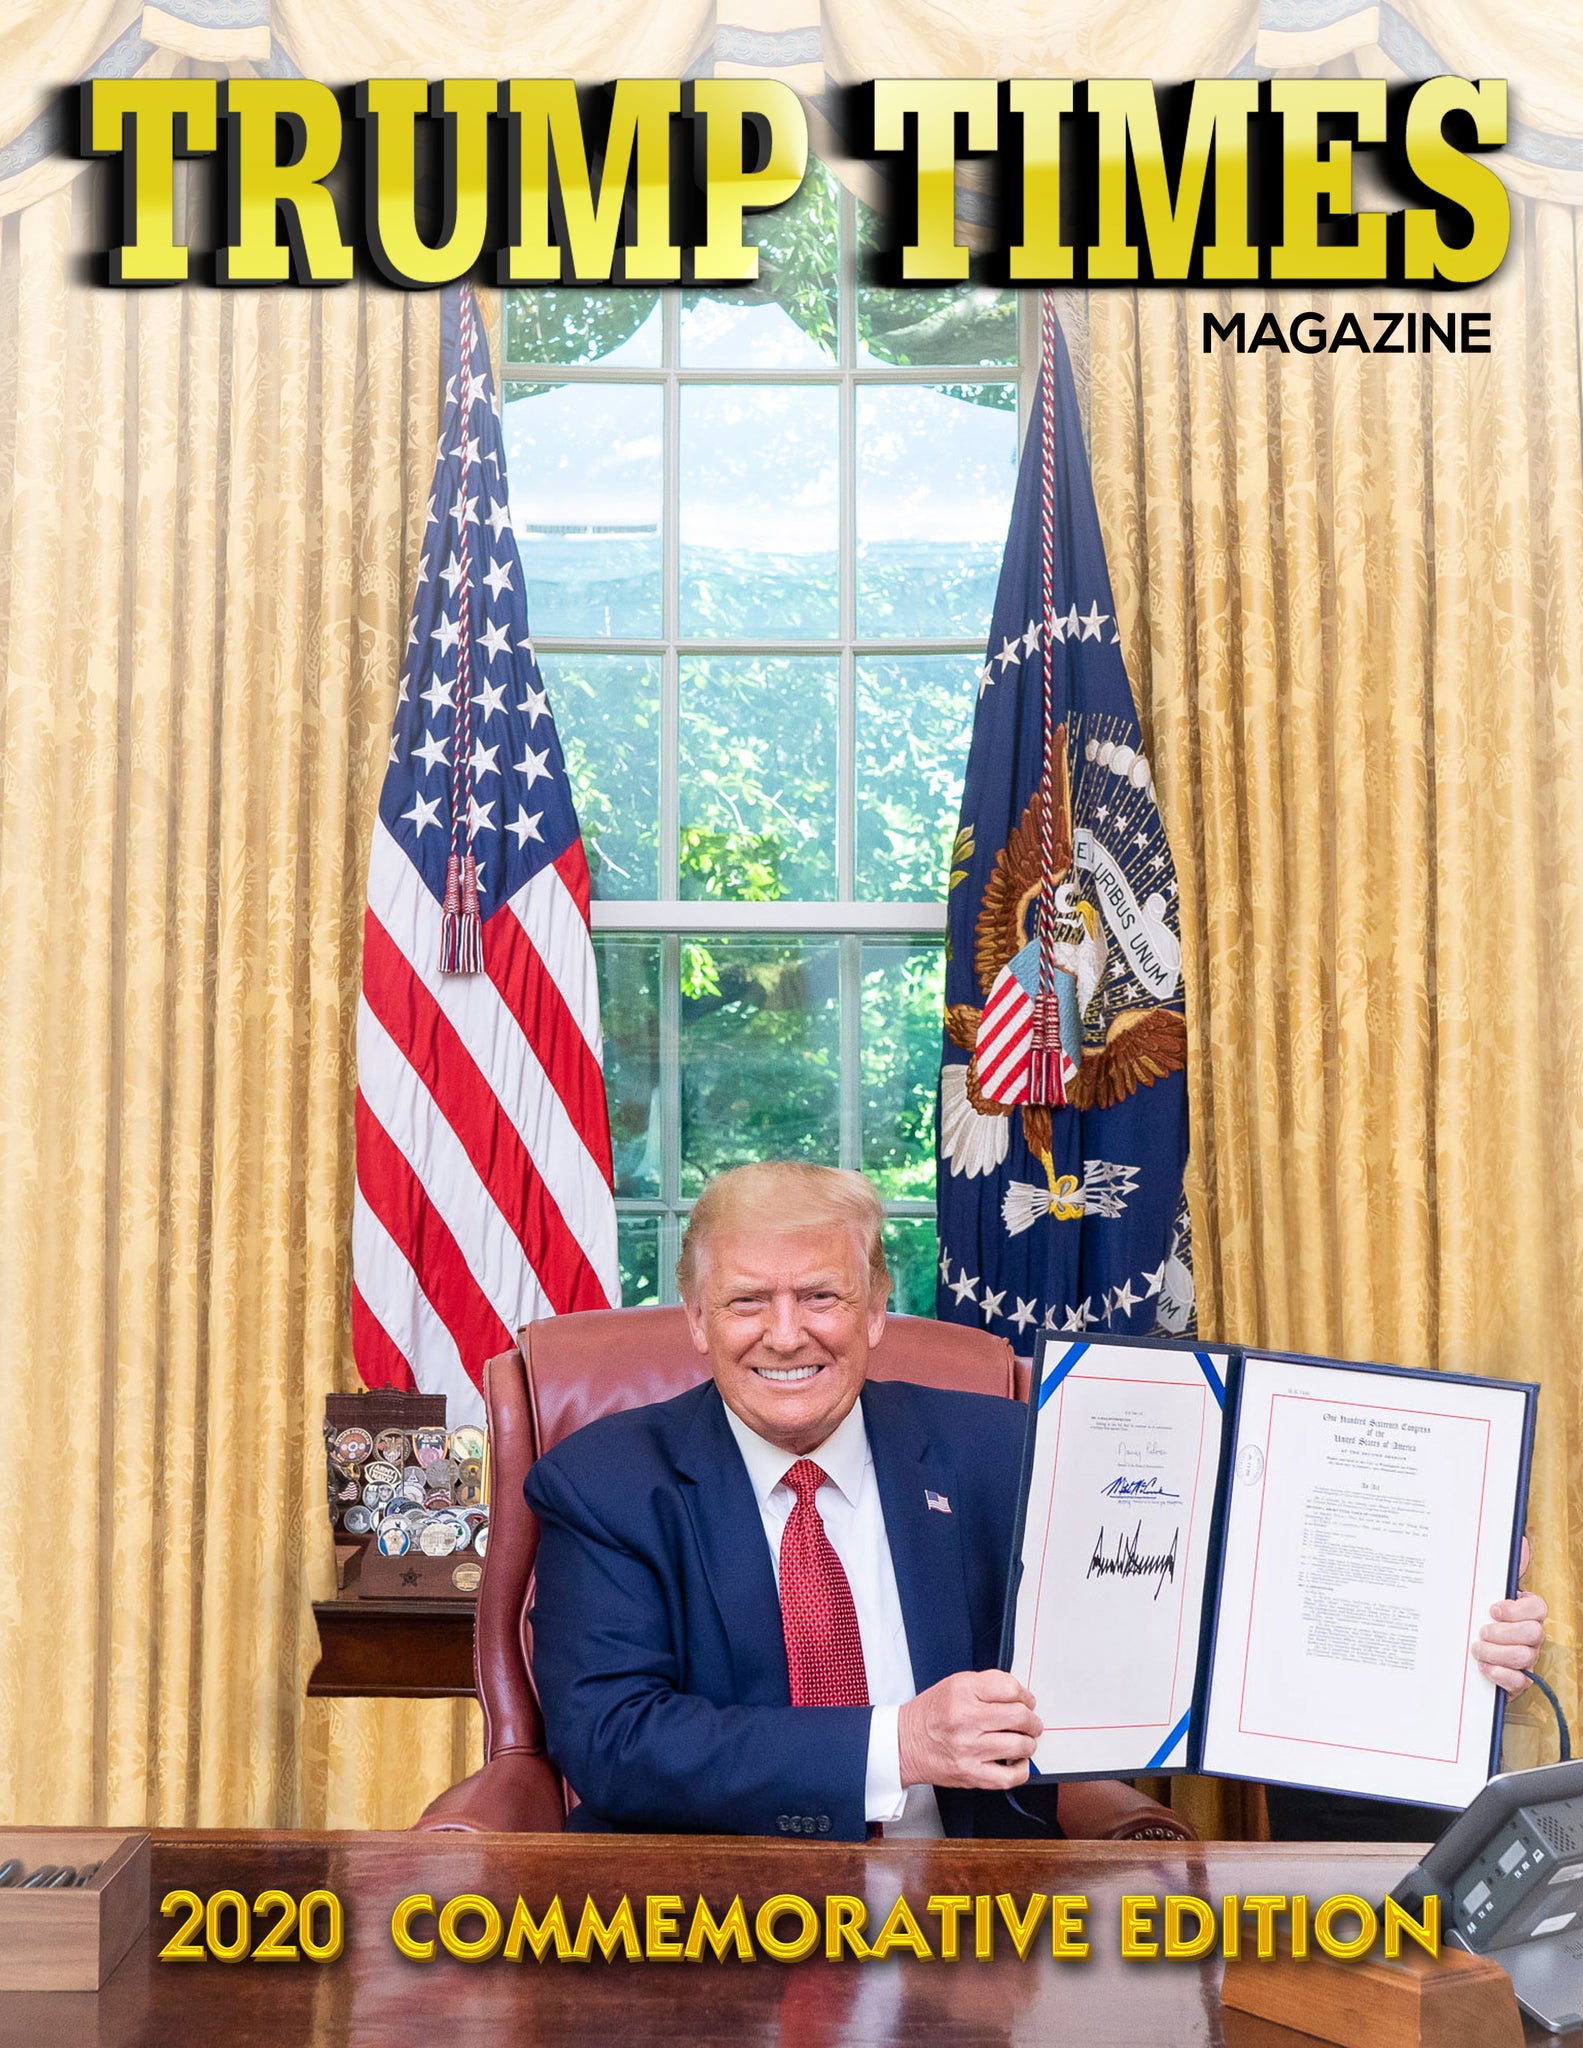  Times Magazine Special Edition